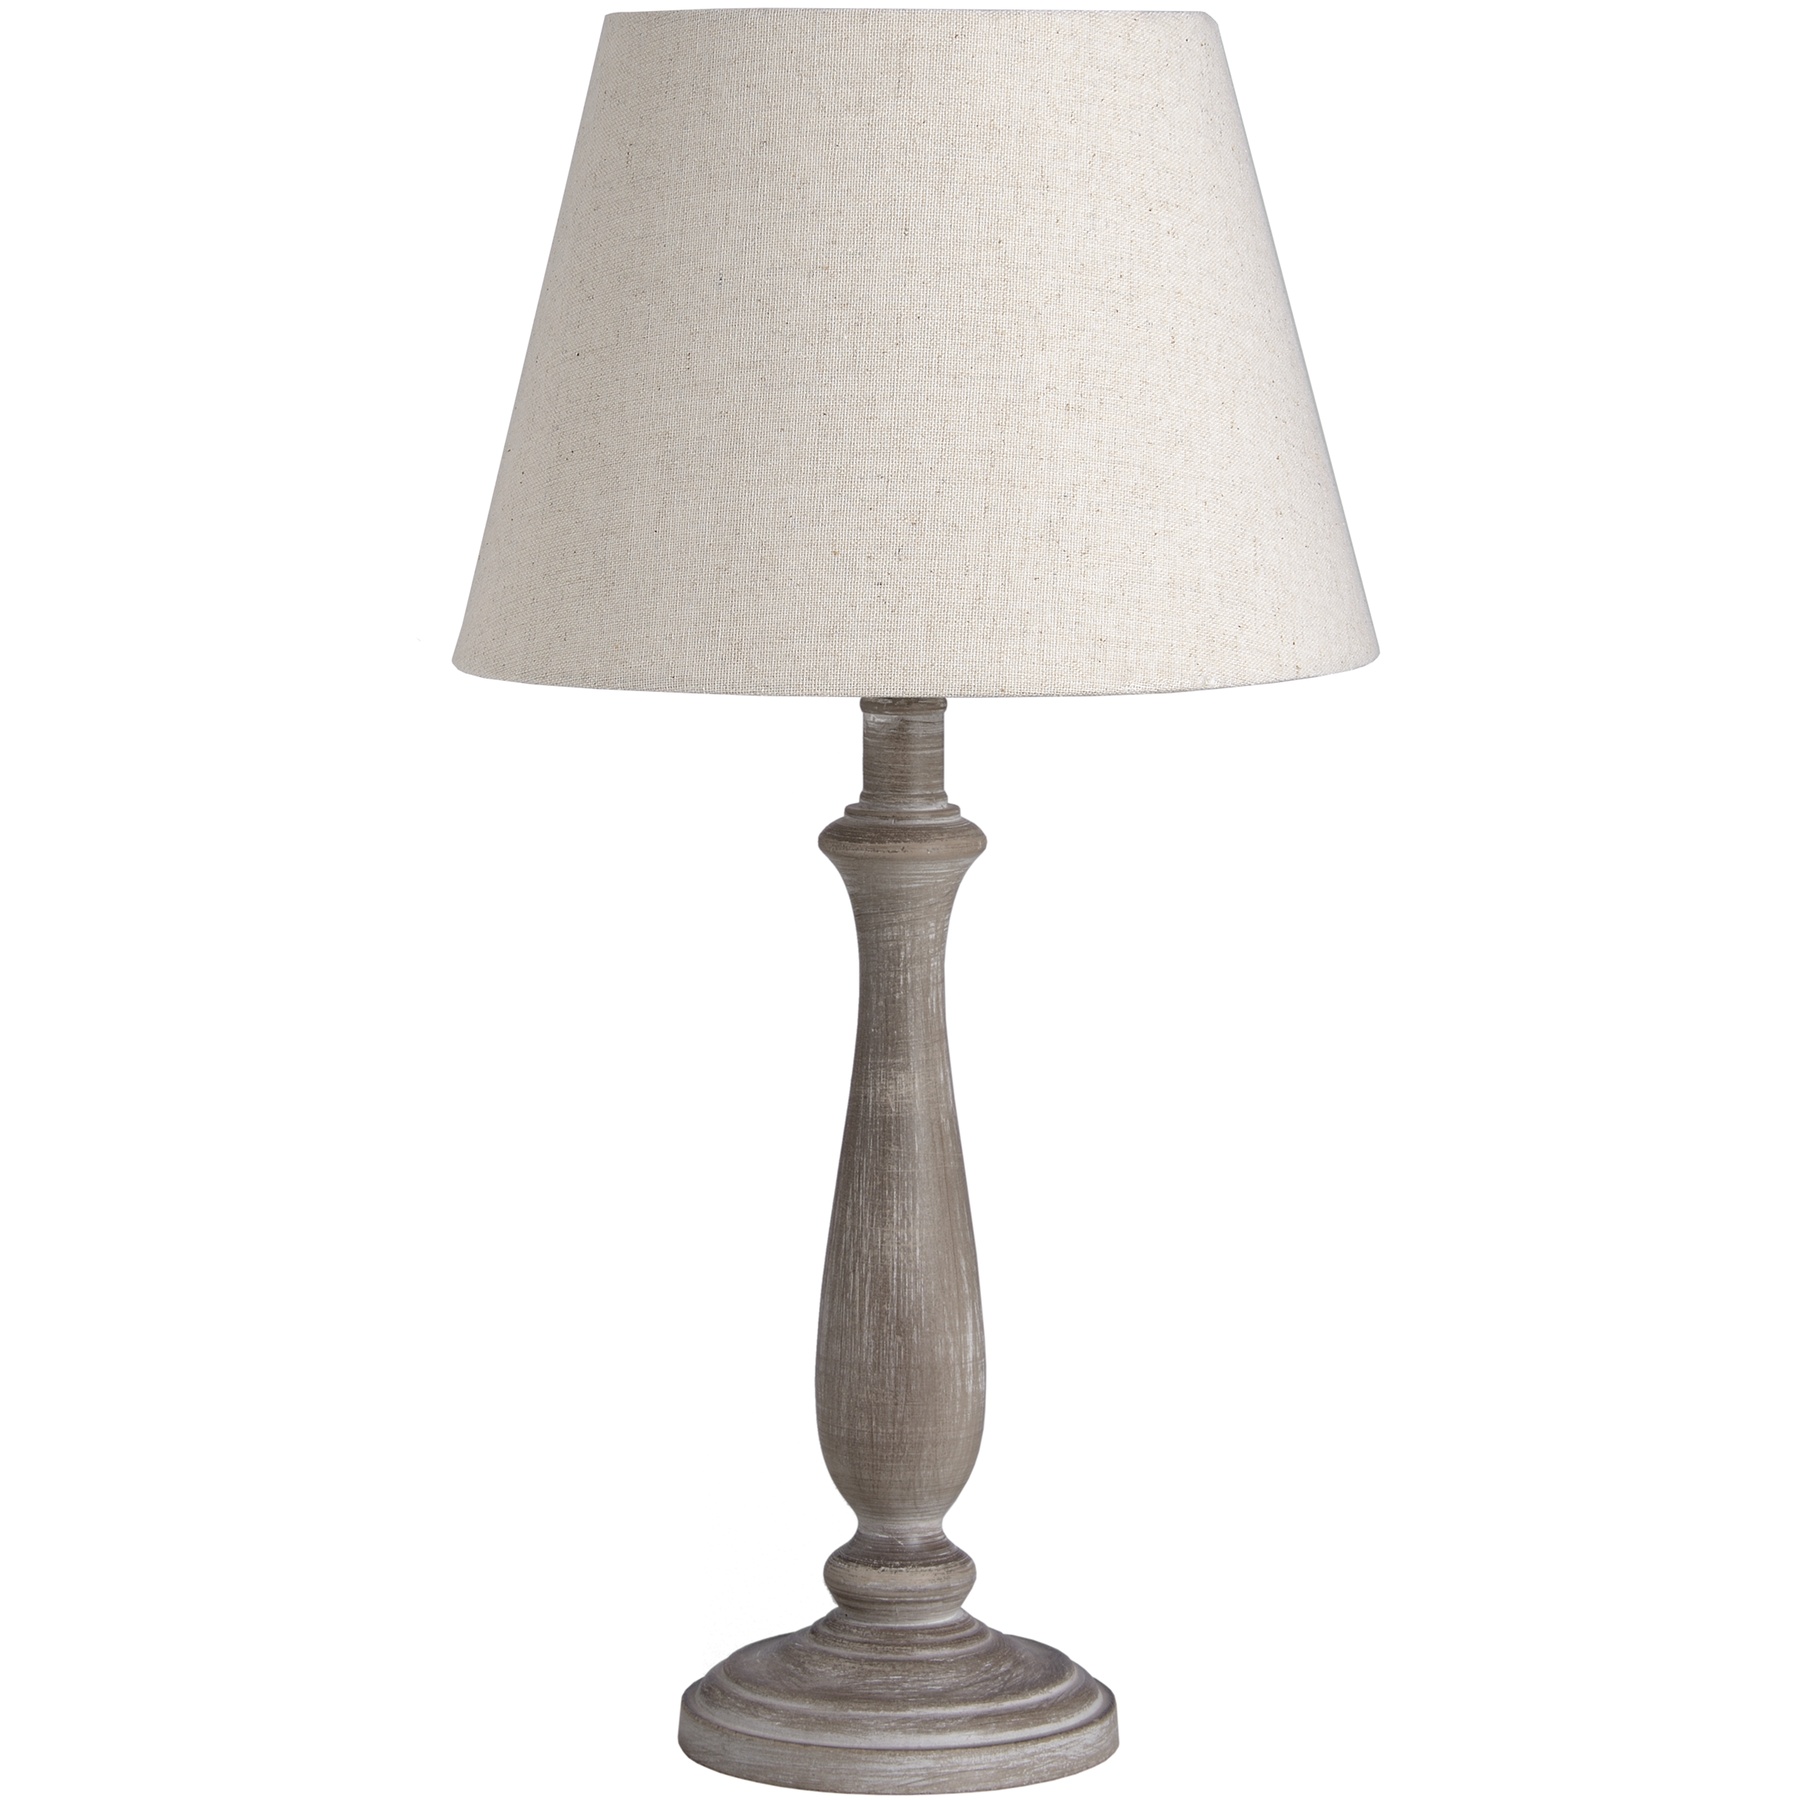 Teos Table Lamp - Image 1